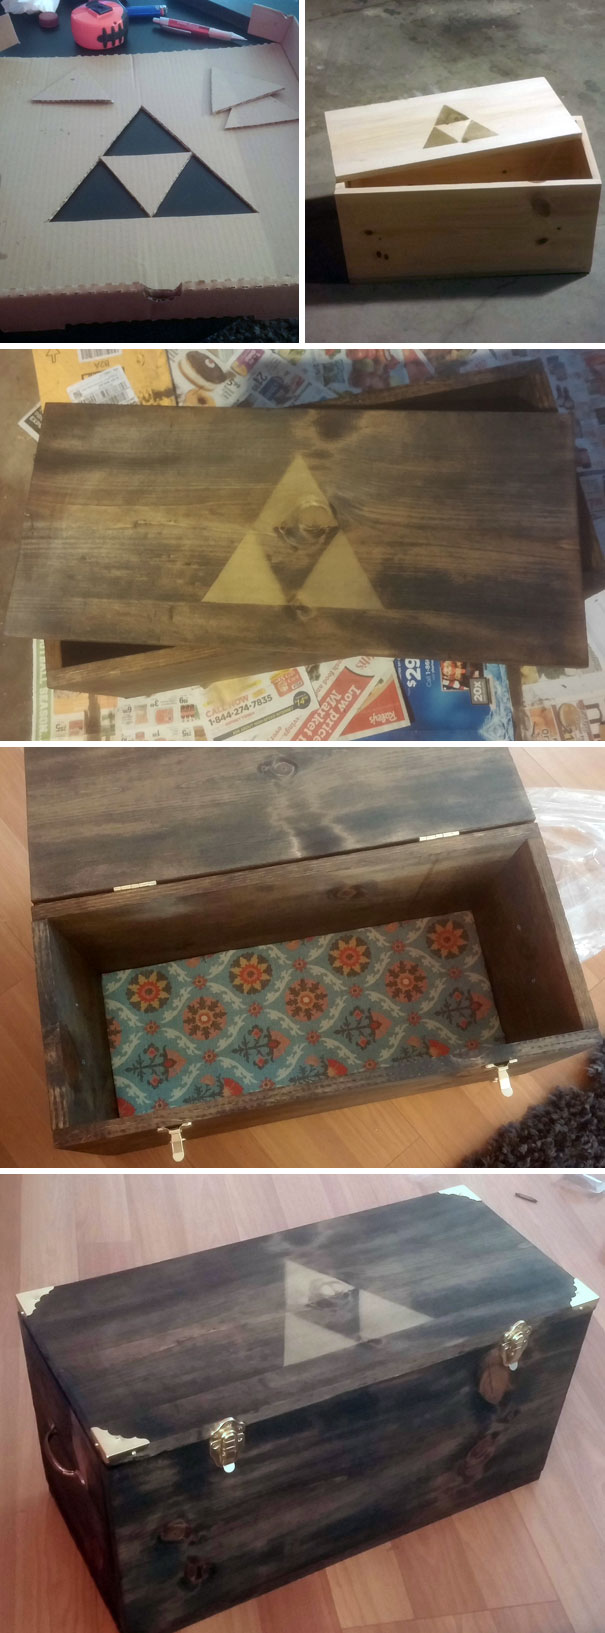 Triforce Chest I Made For My Girlfriend To Hold Her Art Supplies